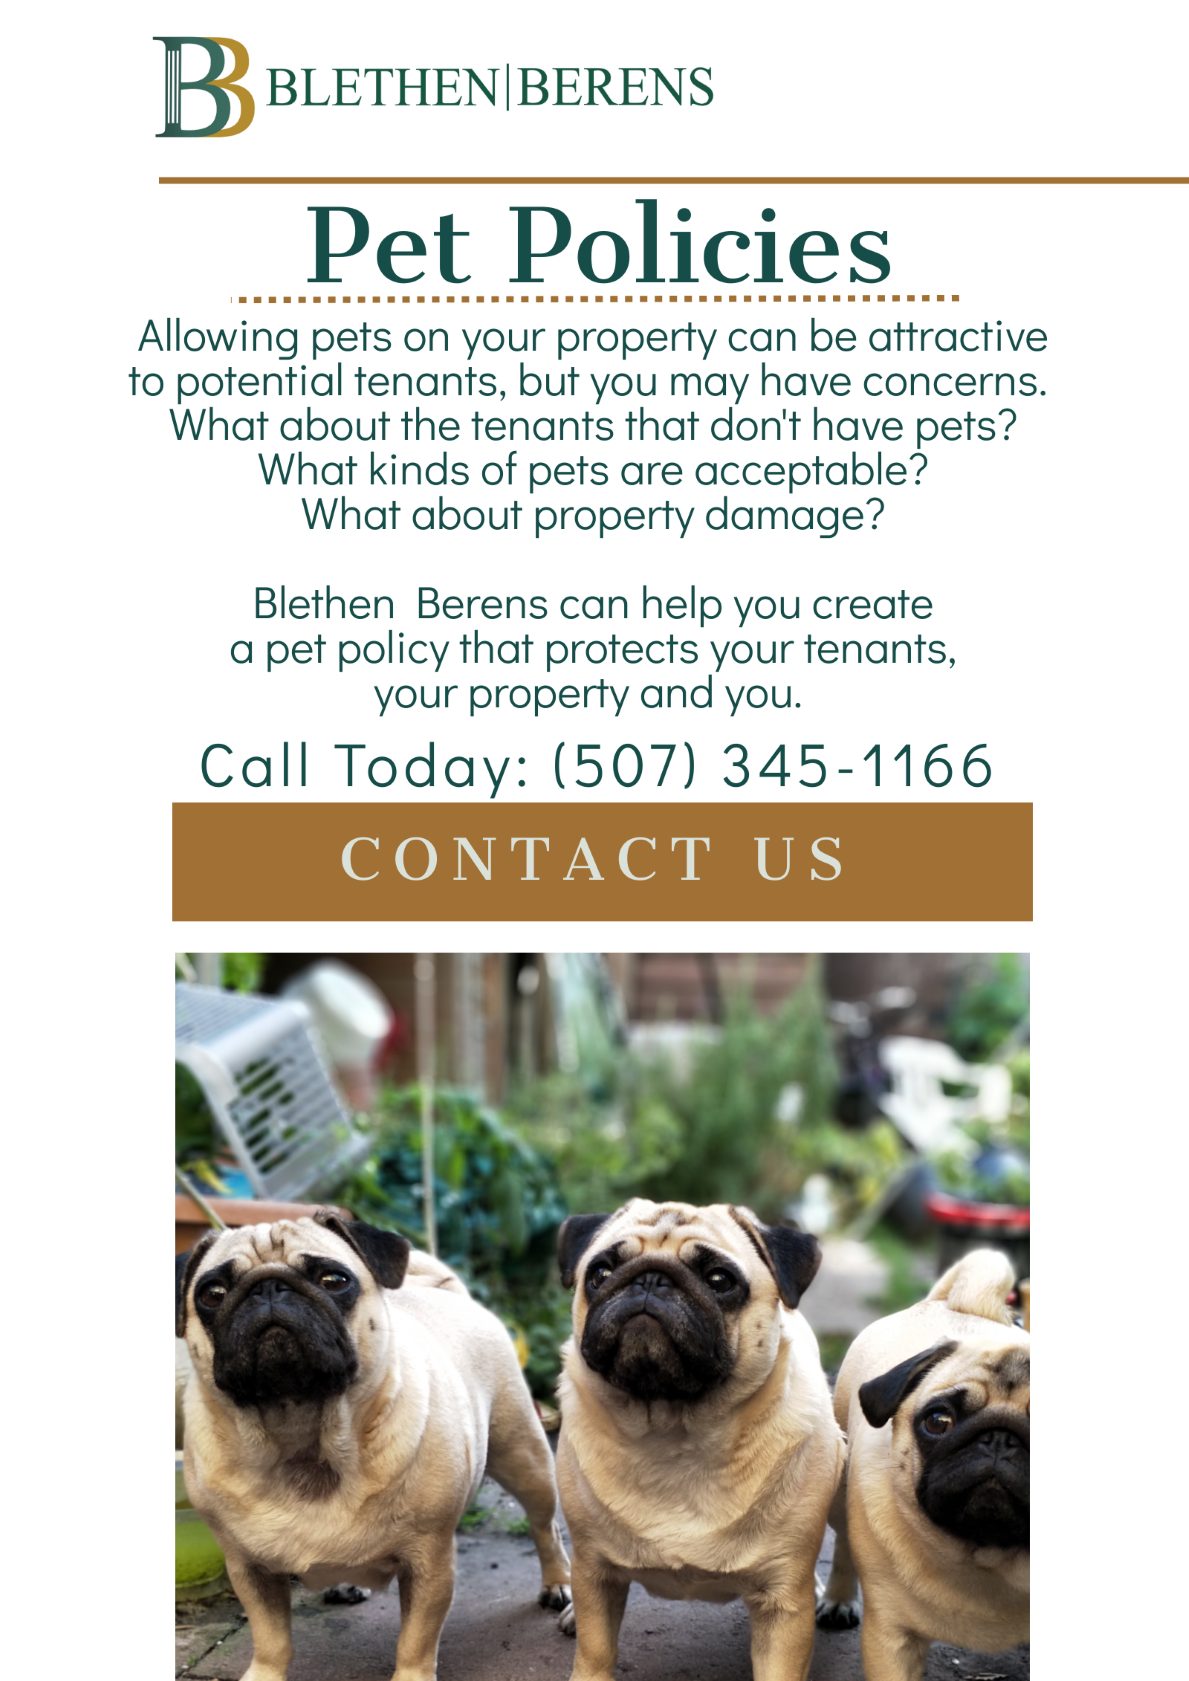 Landlords Are You Considering a Pet Policy? Blethen Berens Law Firm